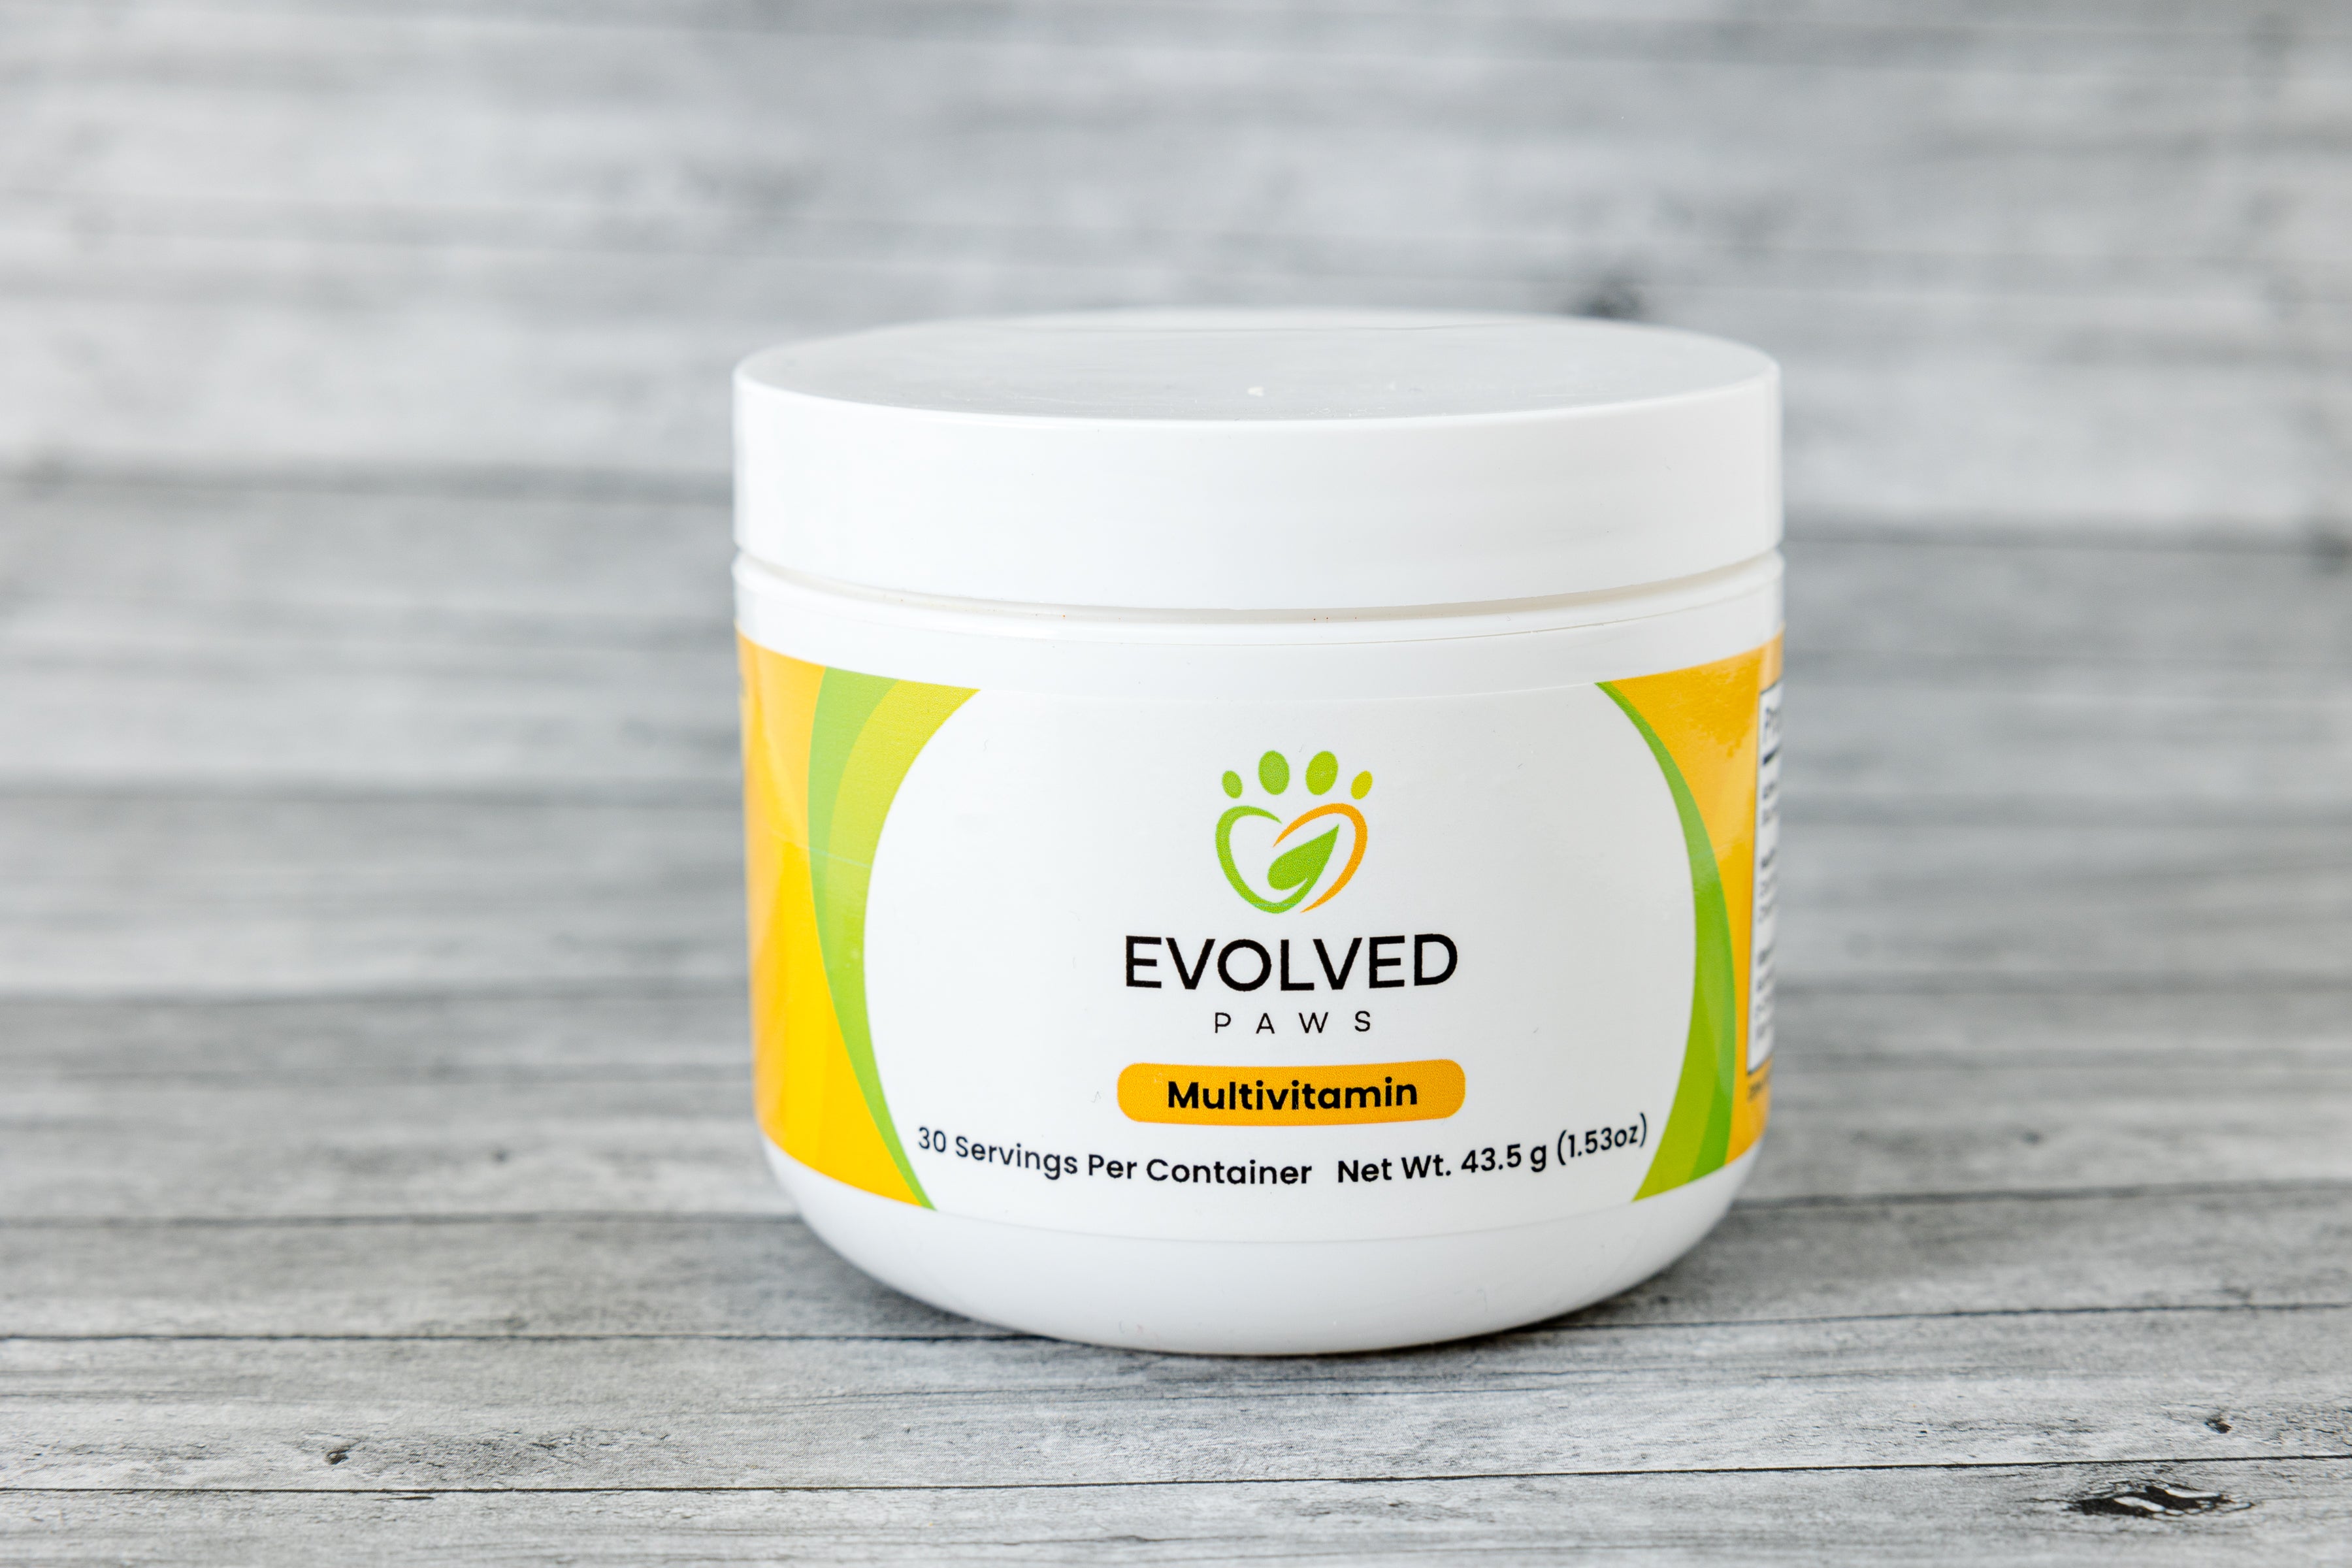 Evolved Paws Multivitamin Powder for Dogs and Cats